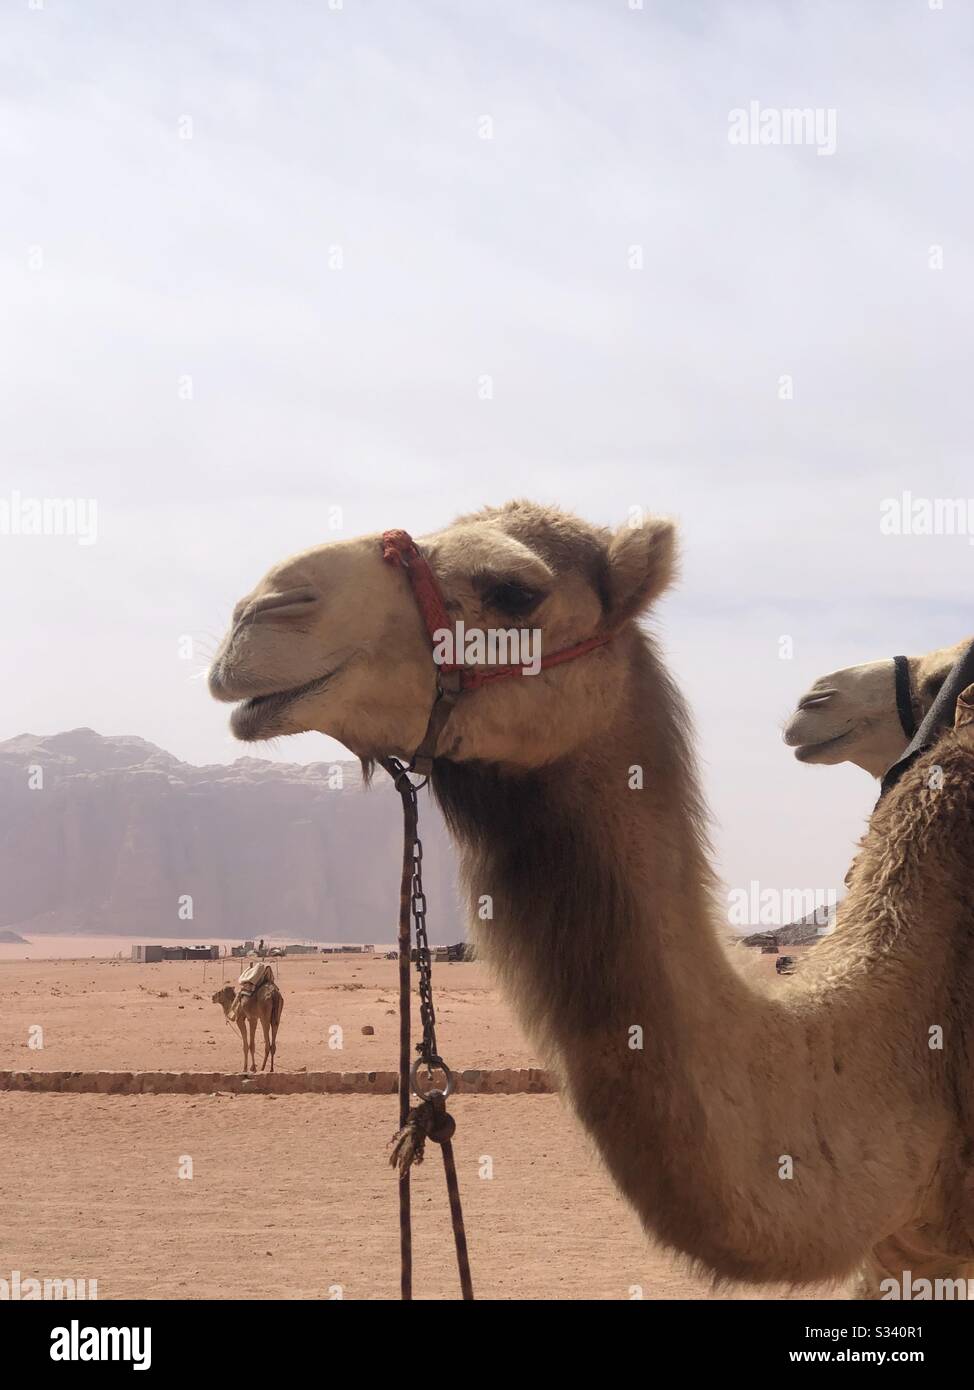 Portrait of a camel against the background of Wadi Rum valley in Jordan Stock Photo